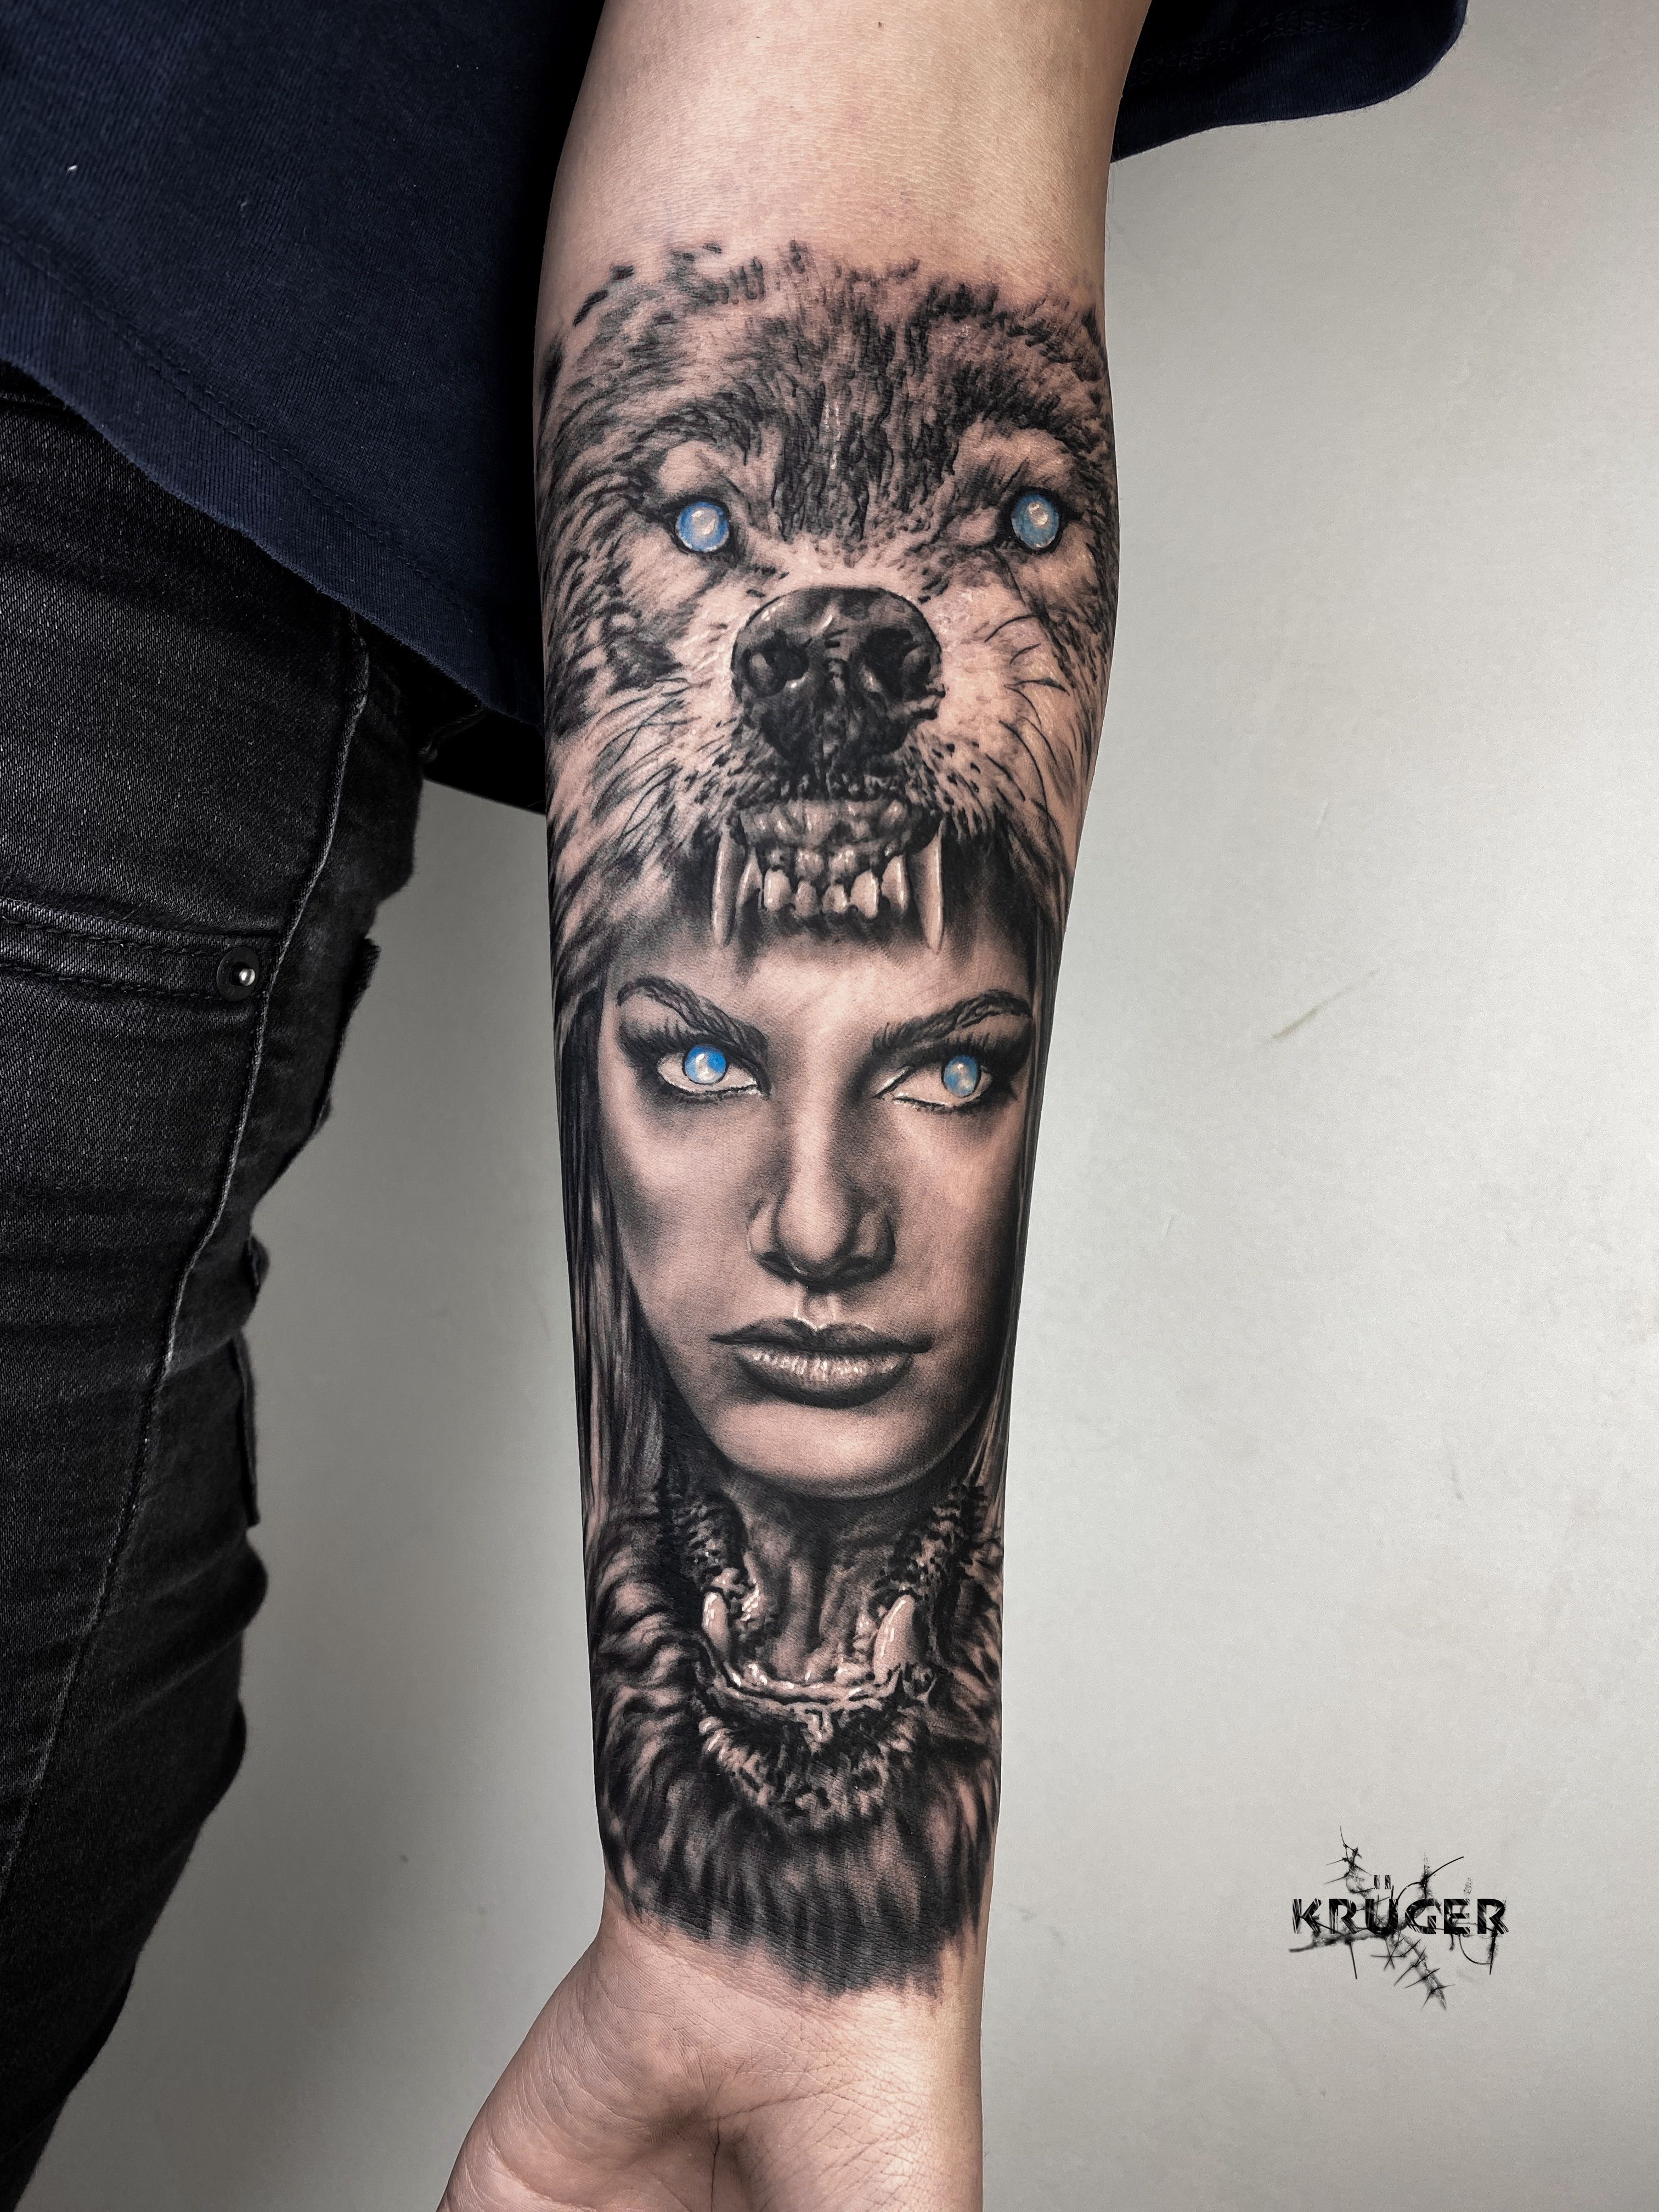 Tattoo Nebula  wolves and women have much in common both share a wild  spirit a quiet confidence that screams loud  alpha she wolf tattoo   custom designed and tattooed by